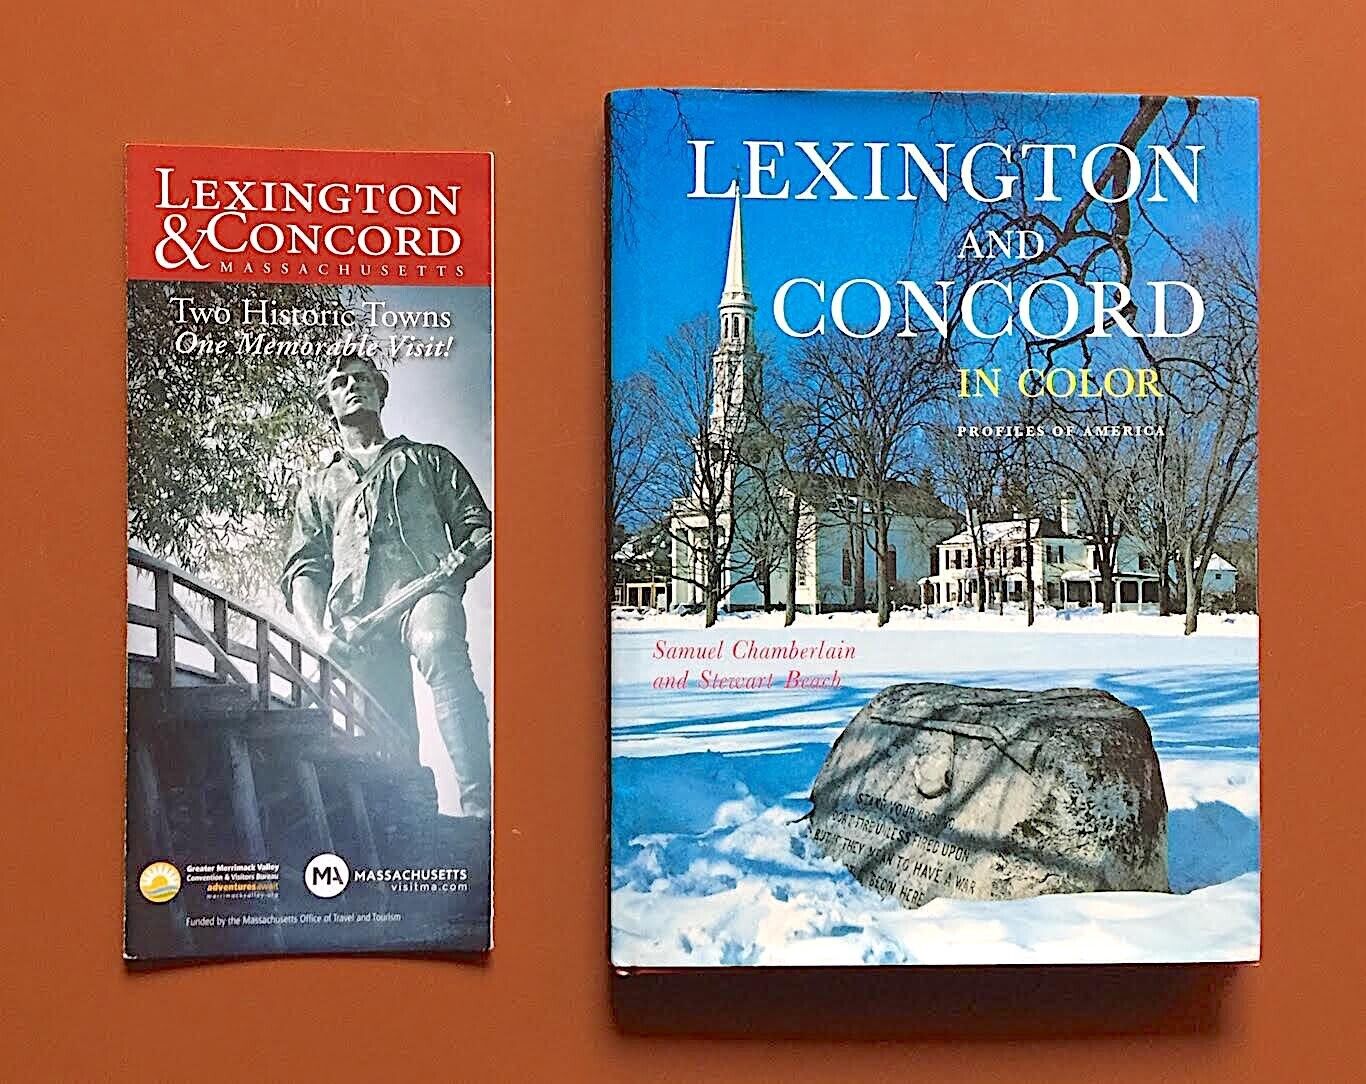 Vintage Pictorial Guide, Map/Brochure for Lexington & Concord, Birthplace of the